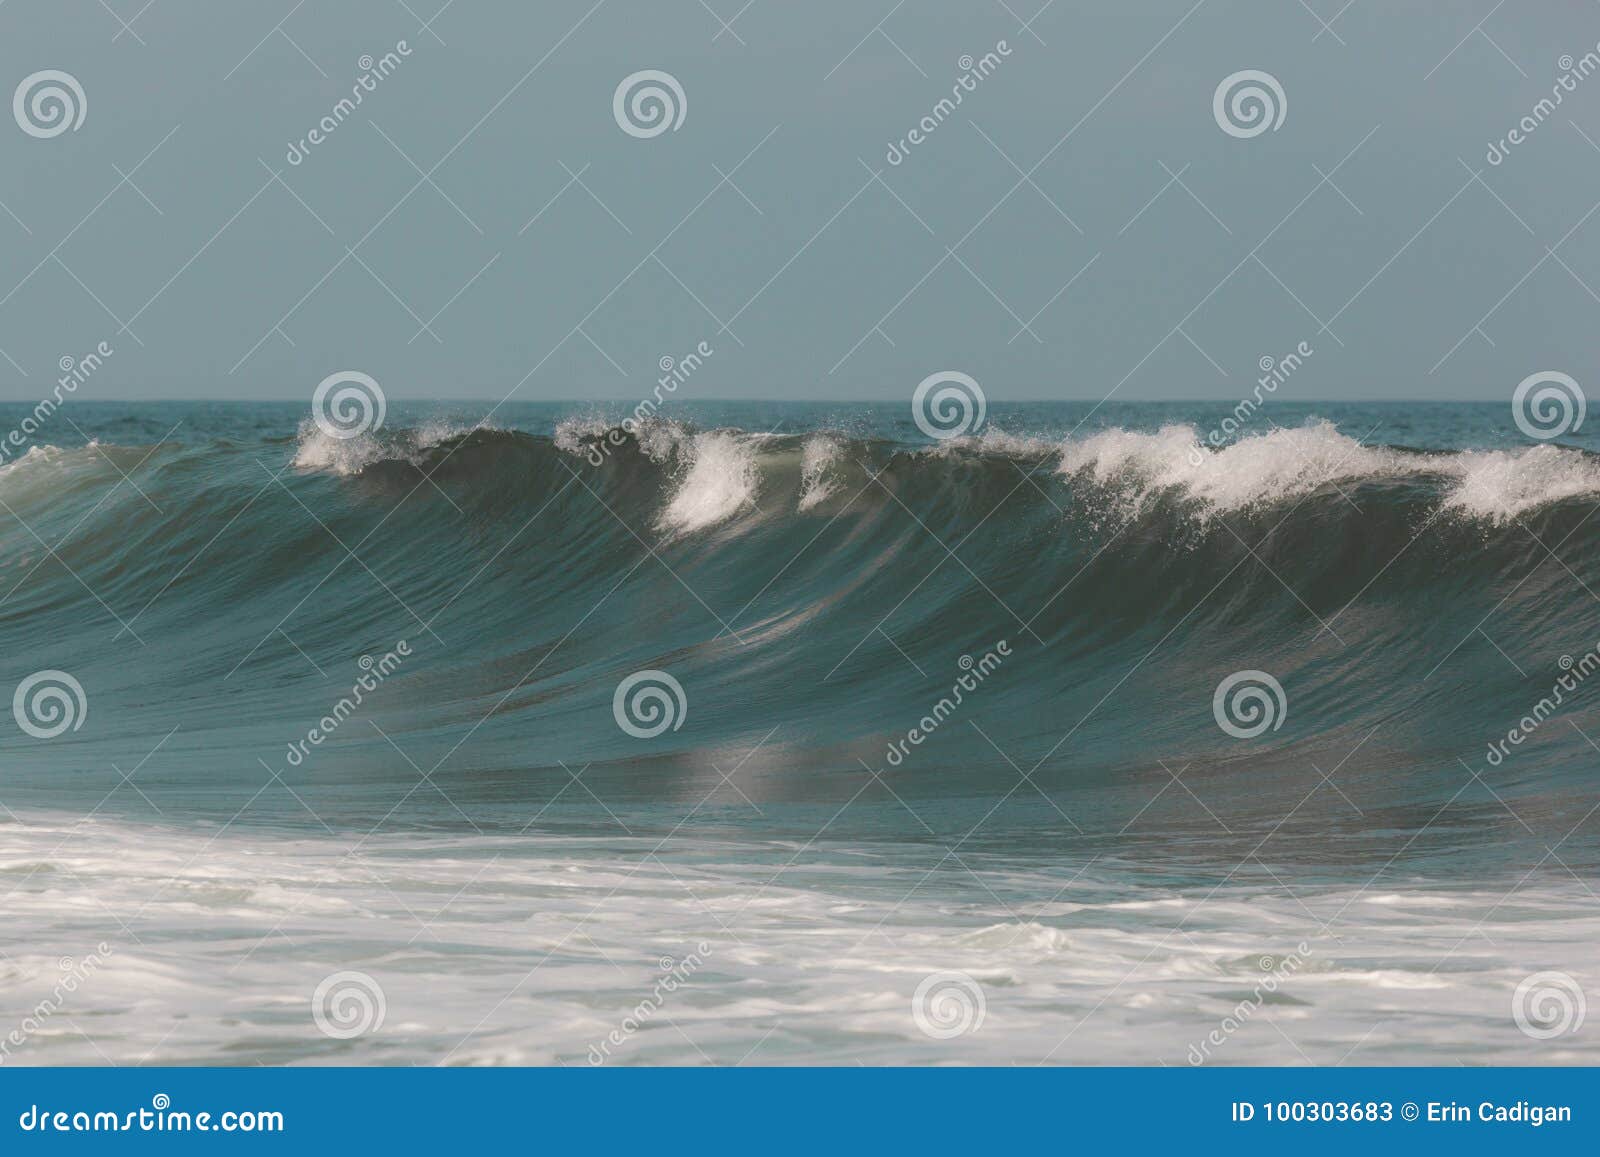 Ocean Spray and Waves stock image. Image of coast, jersey